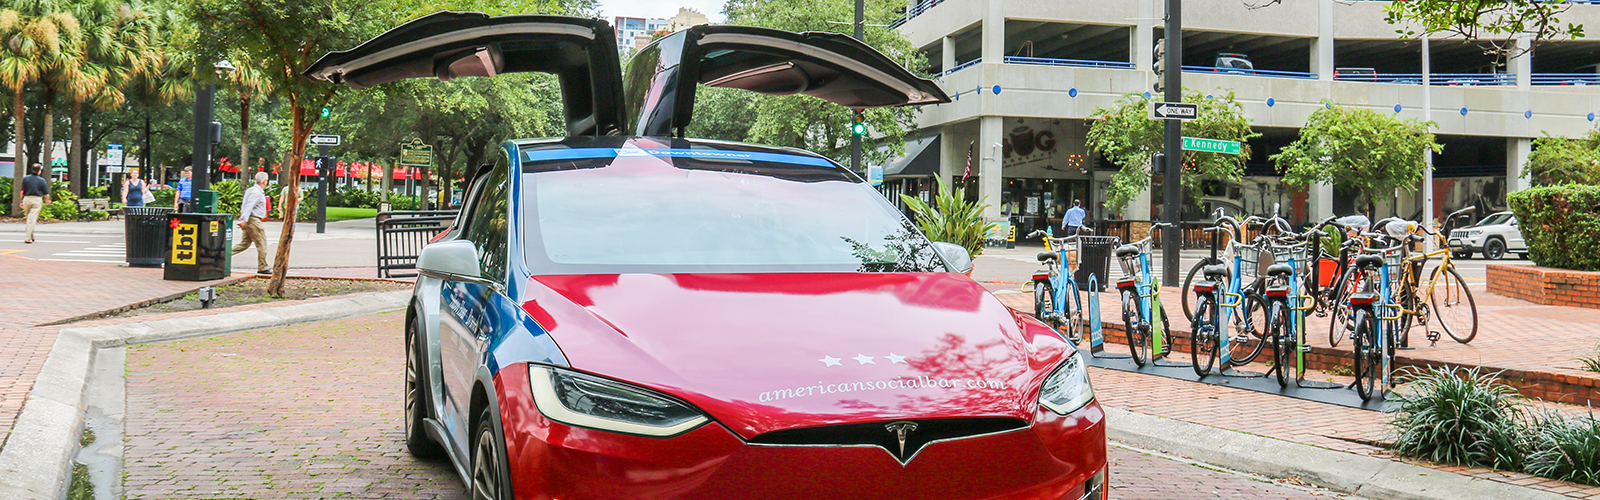 The Downtowner is using Teslas to transport commuters in downtown Tampa.